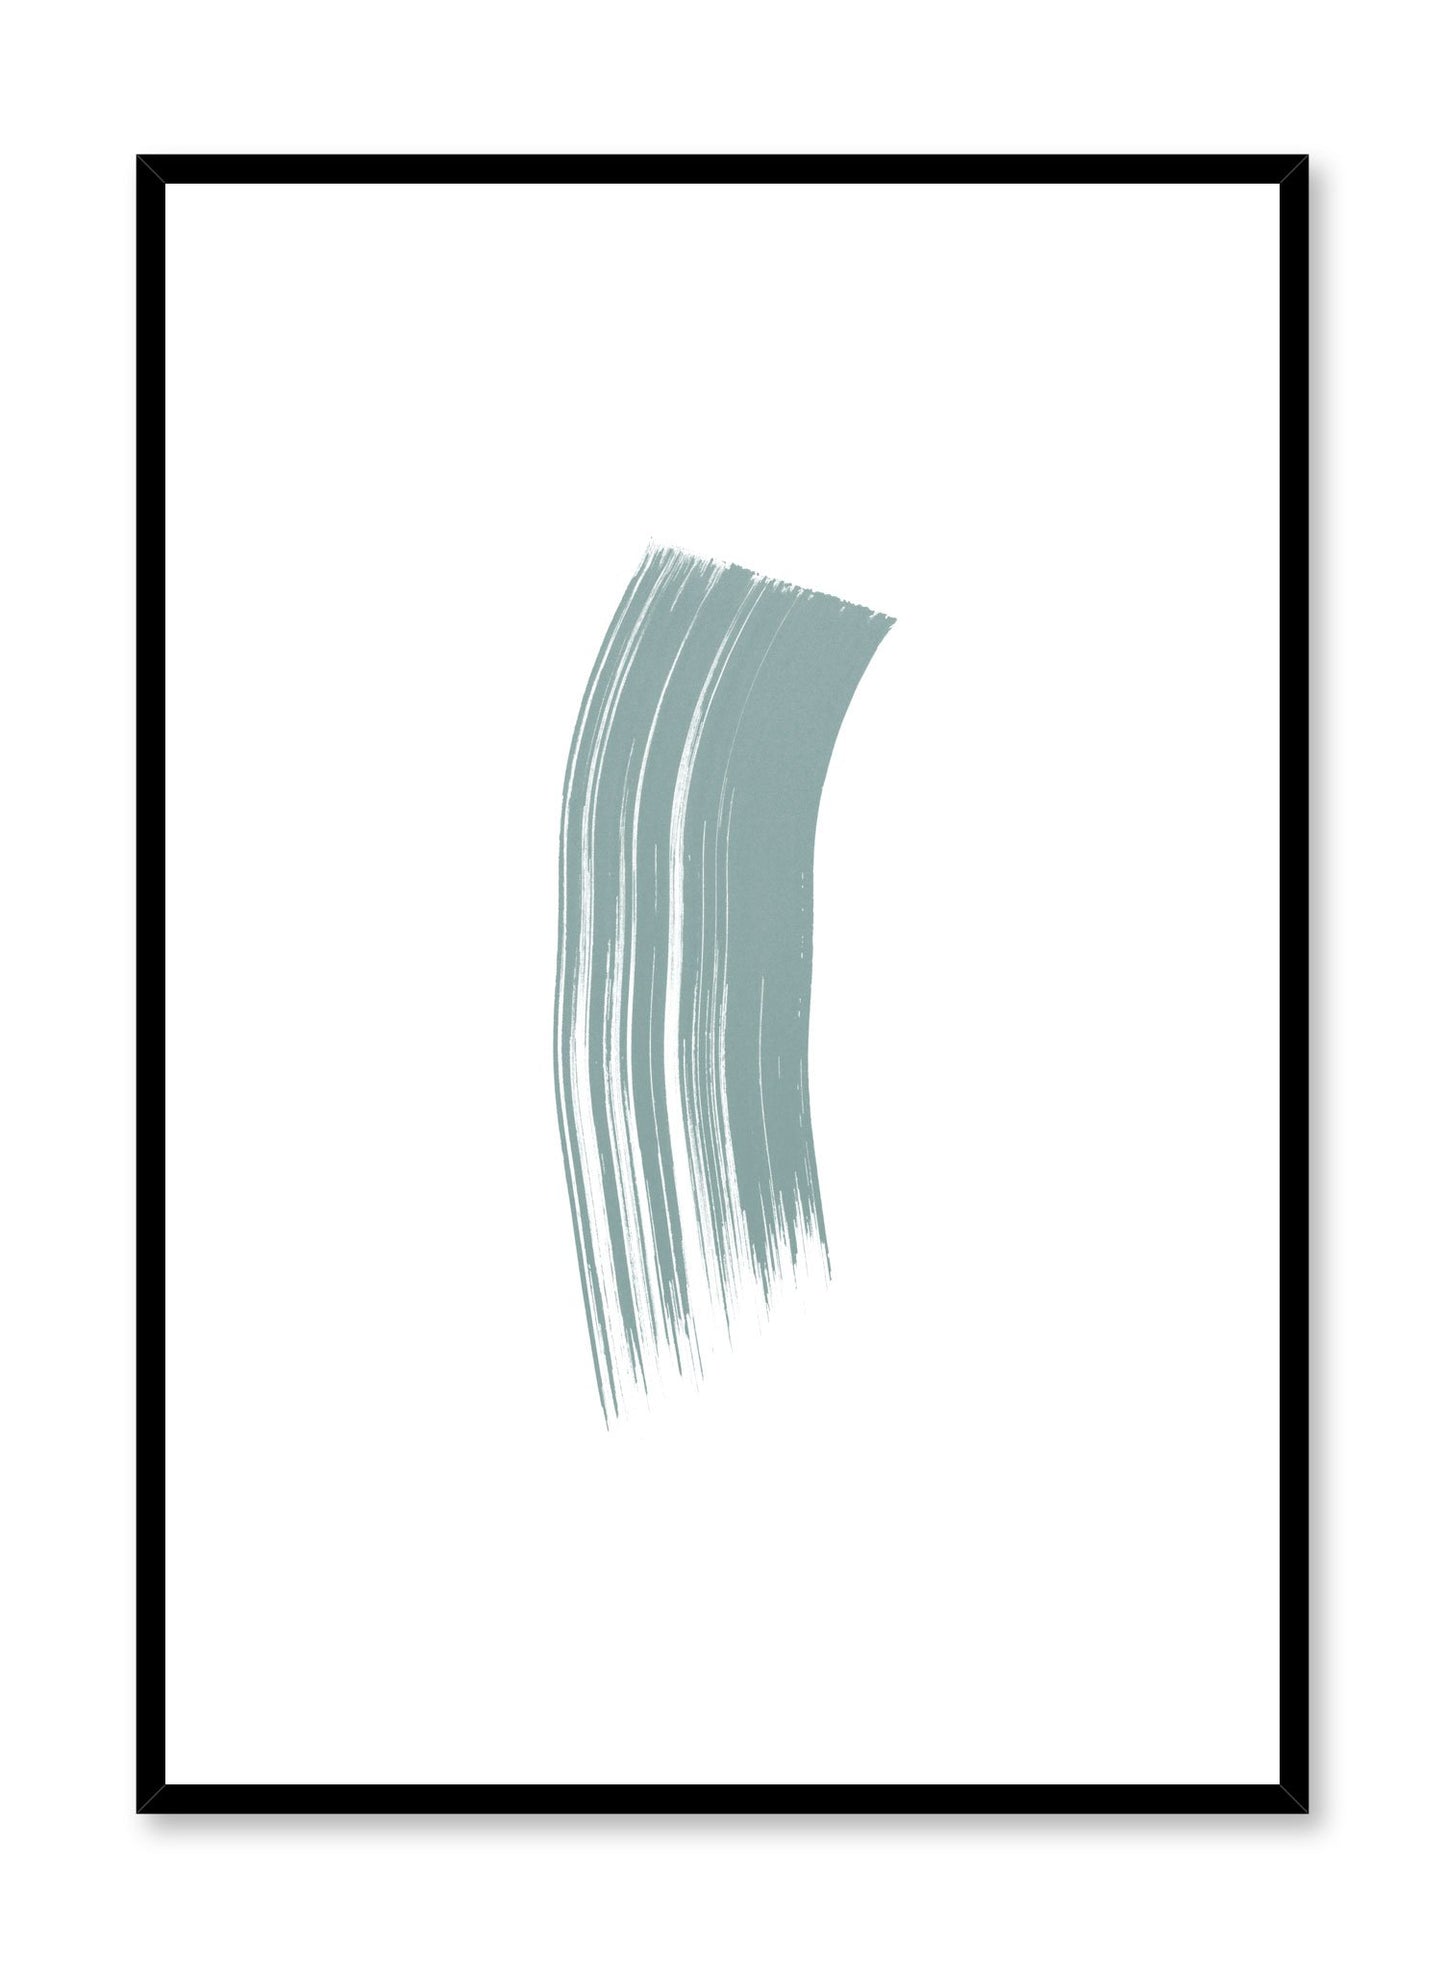 Modern minimalist poster by Opposite Wall with mint green design